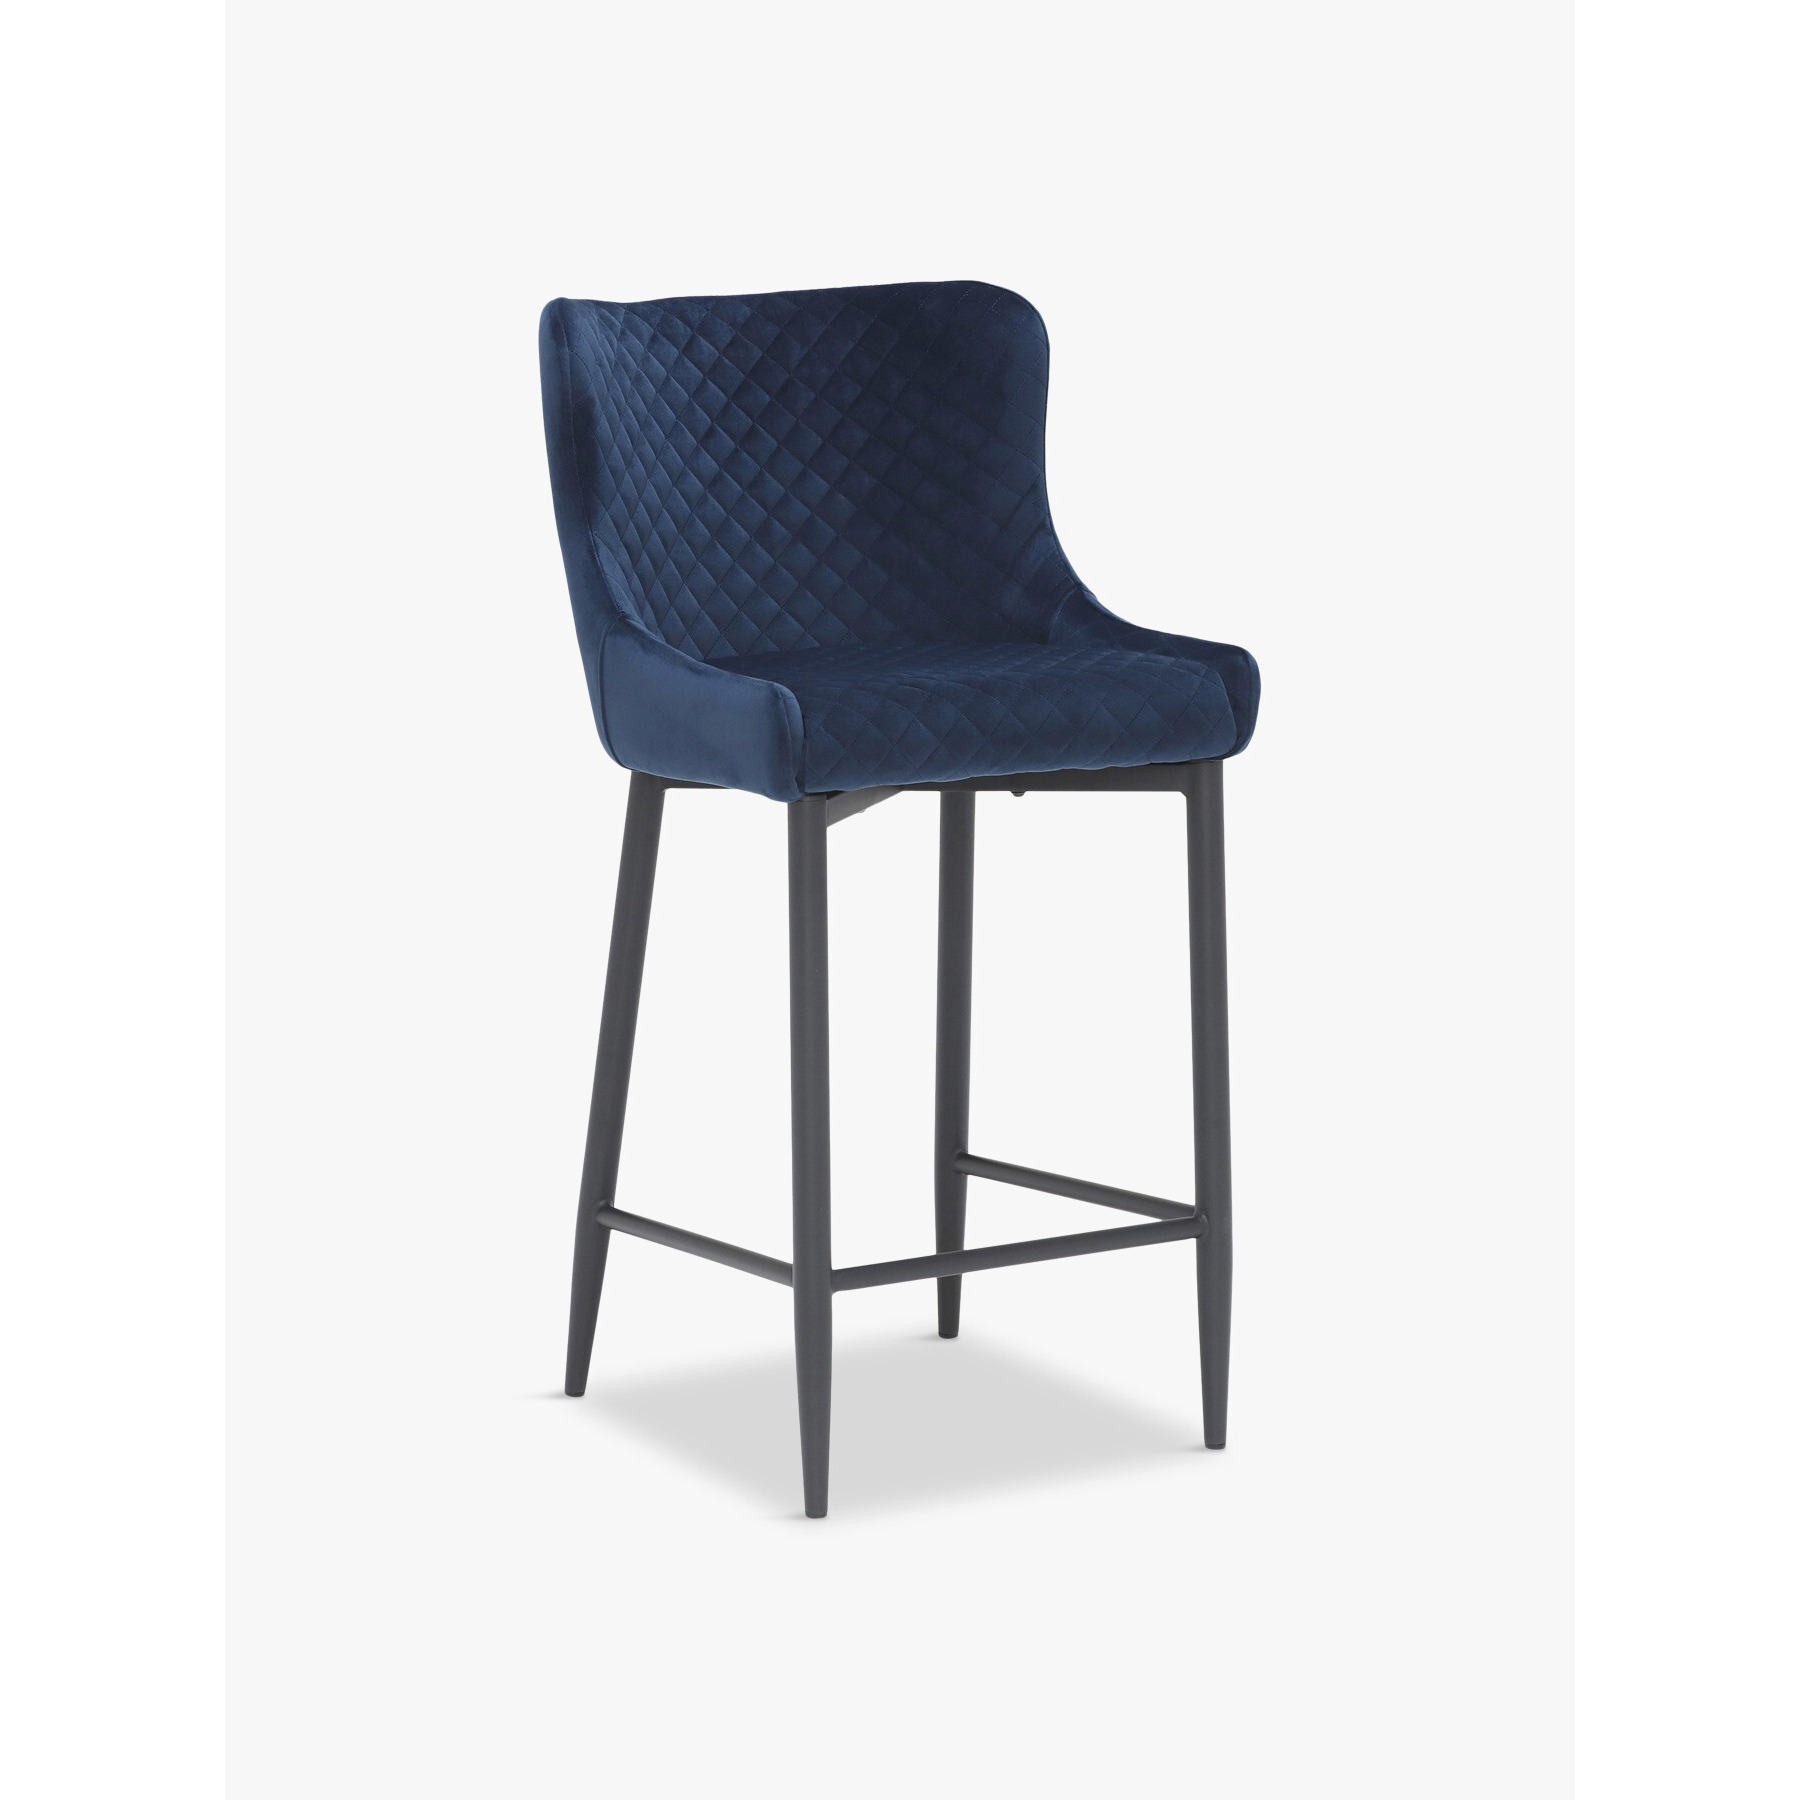 Barker and Stonehouse Rivington Fabric Counter Stool Blue - image 1